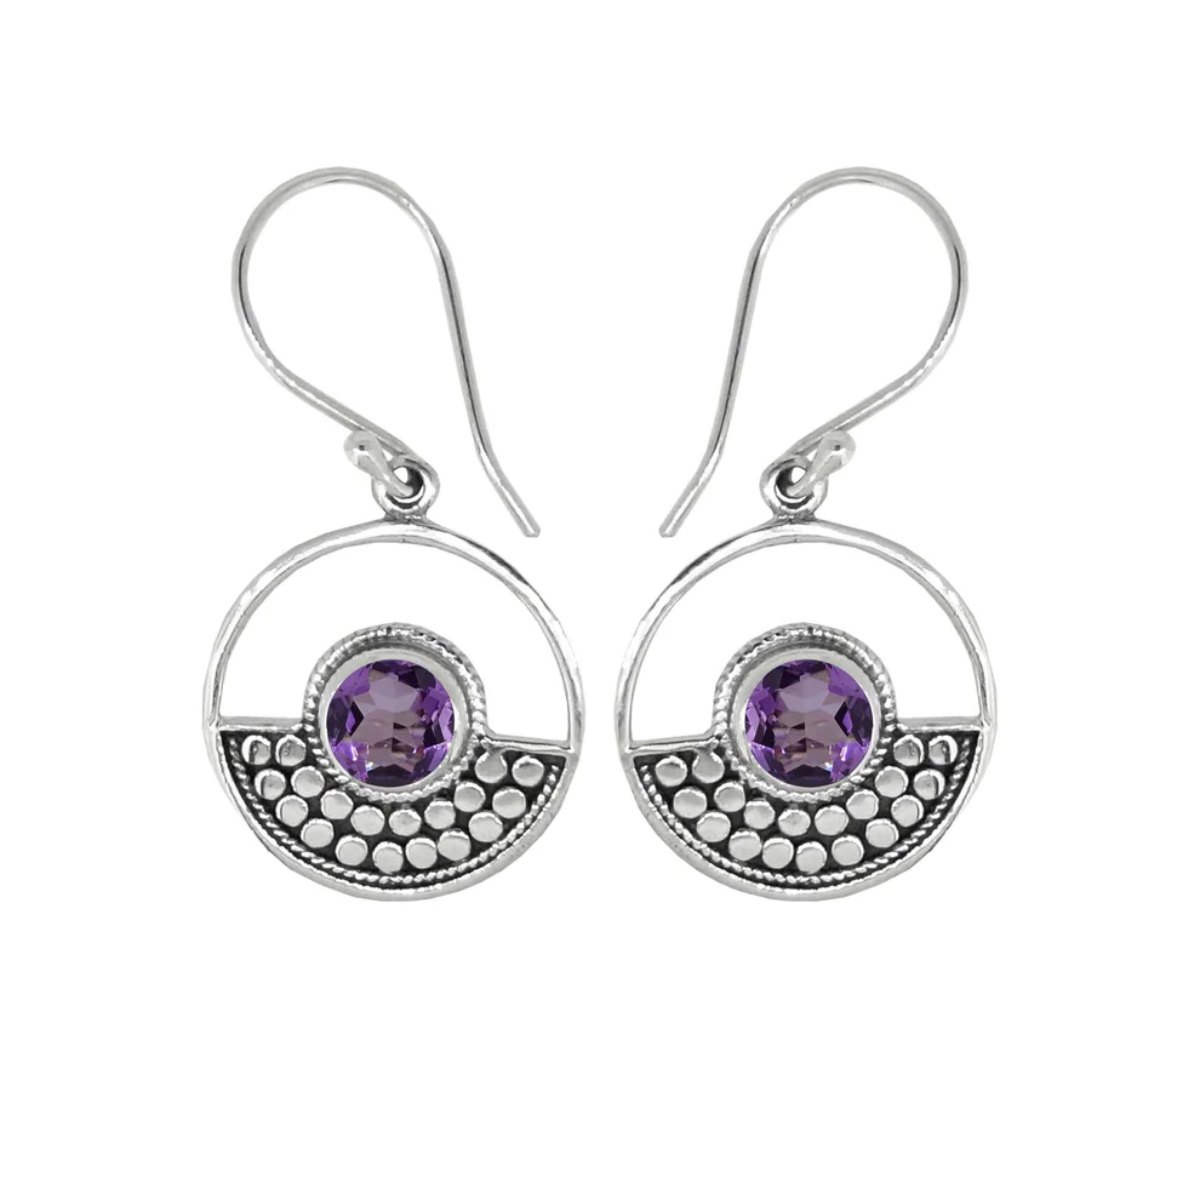 Sterling Silver design in a circle surrounds a circular amethyst stone on ear wires. Half of the circle is dotted with an oxidized sterling design, the other half is open.  On a plain white background. 